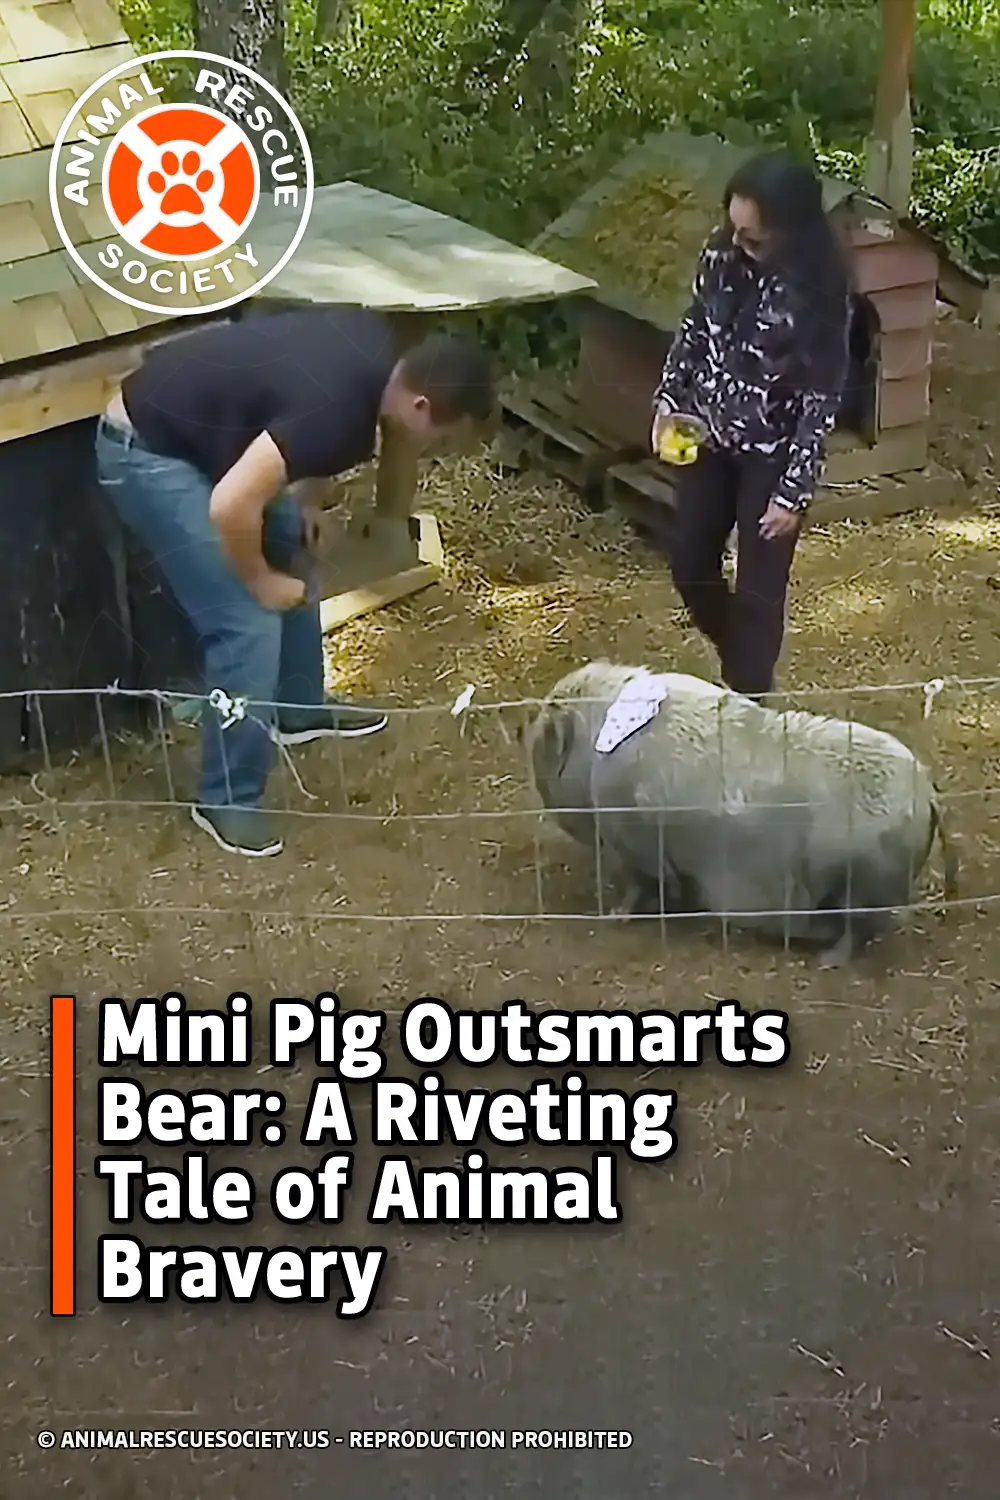 Mini Pig Outsmarts Bear: A Riveting Tale of Animal Bravery